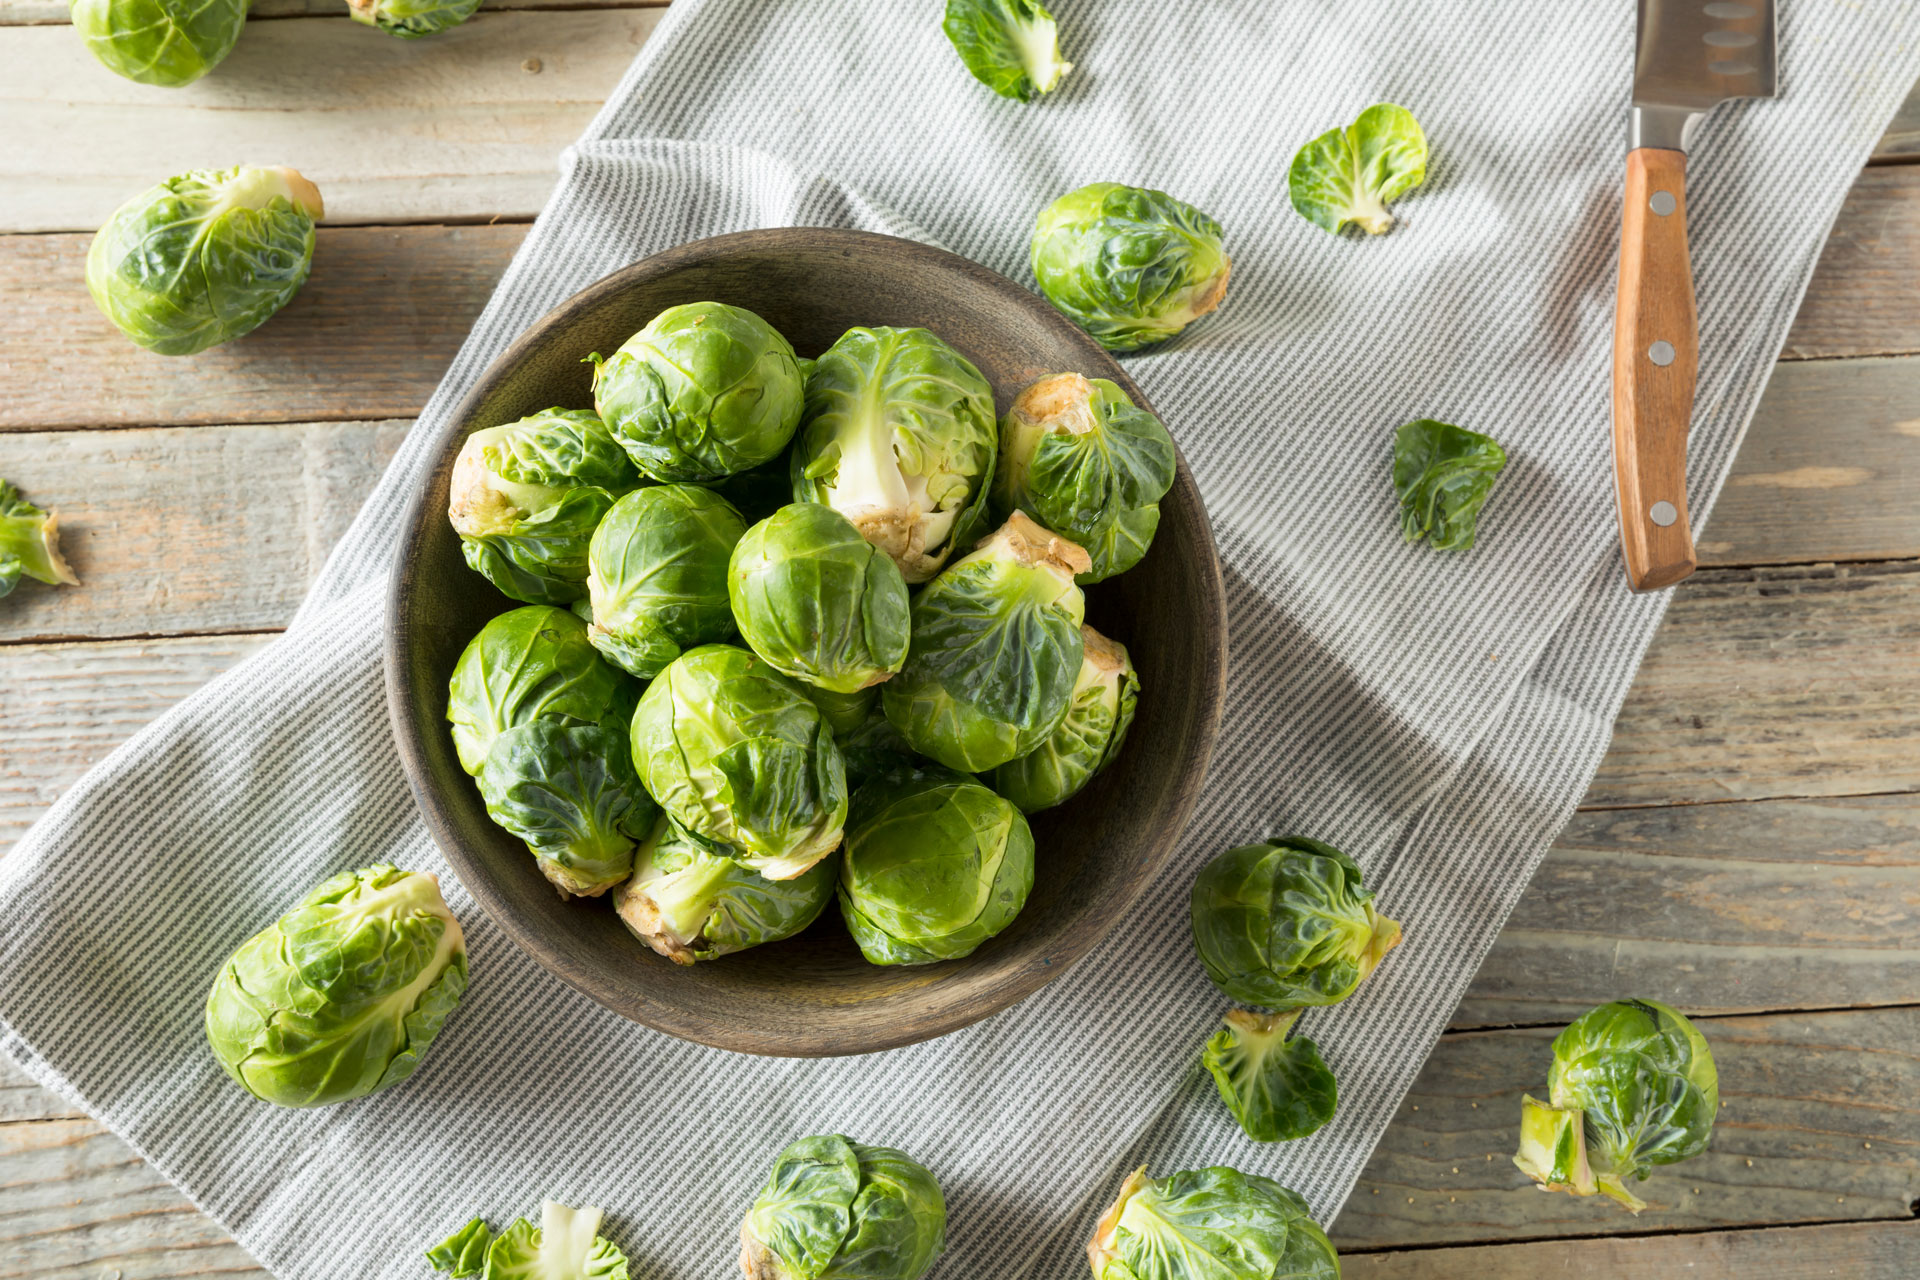 Vegetable of the Week: Brussels Sprouts